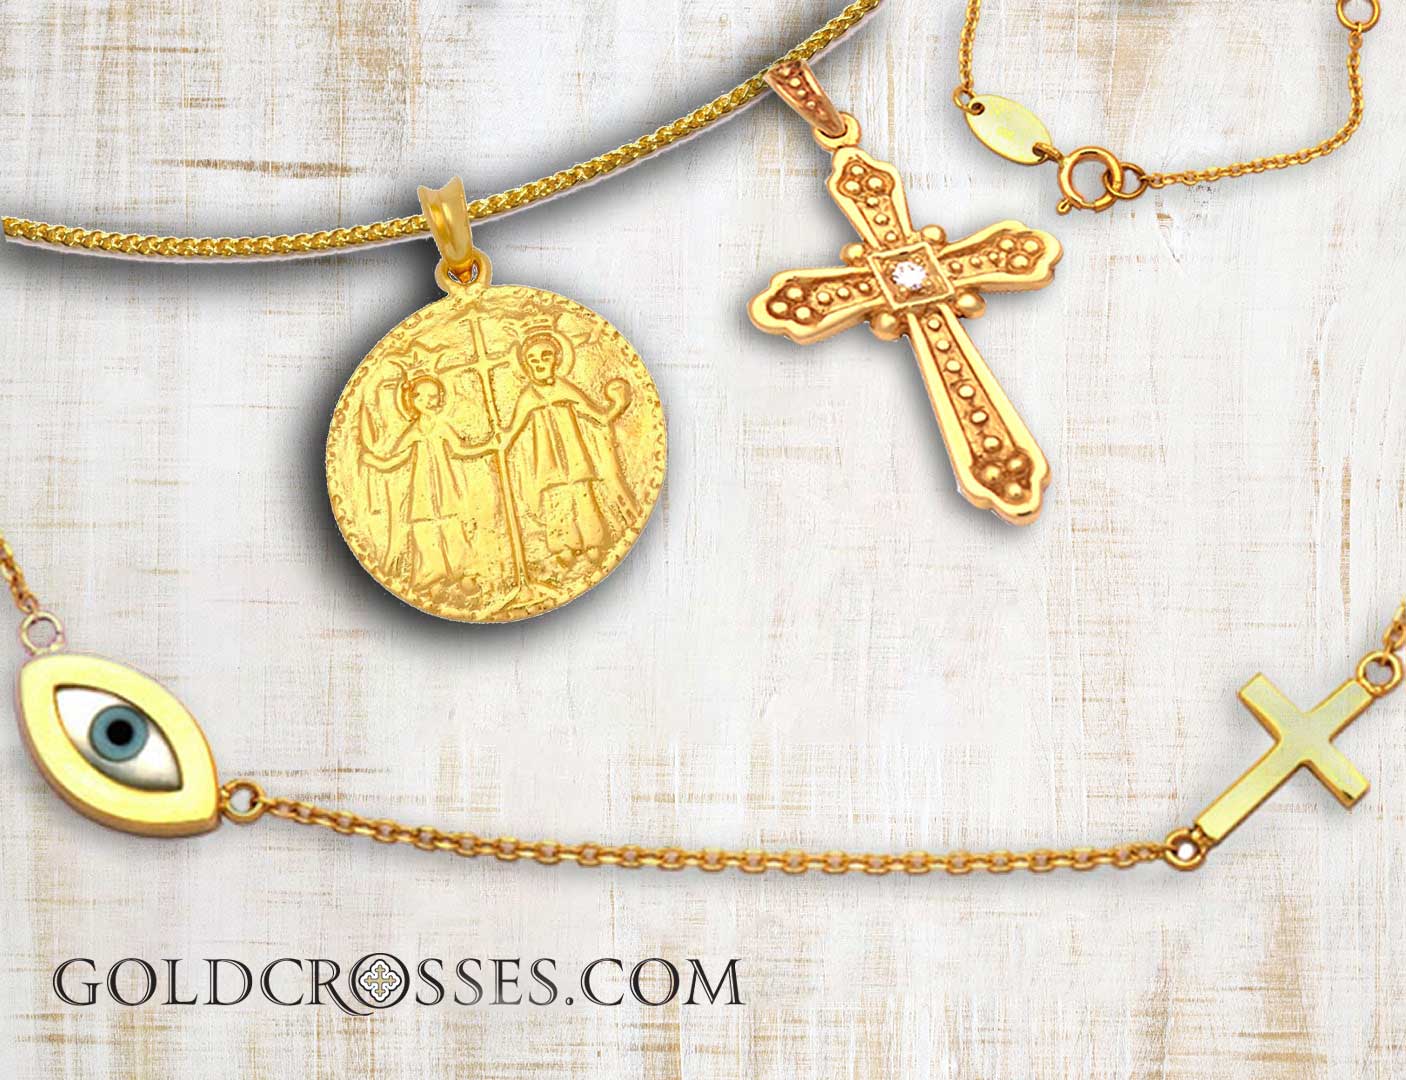 gold crosses gold jewelry